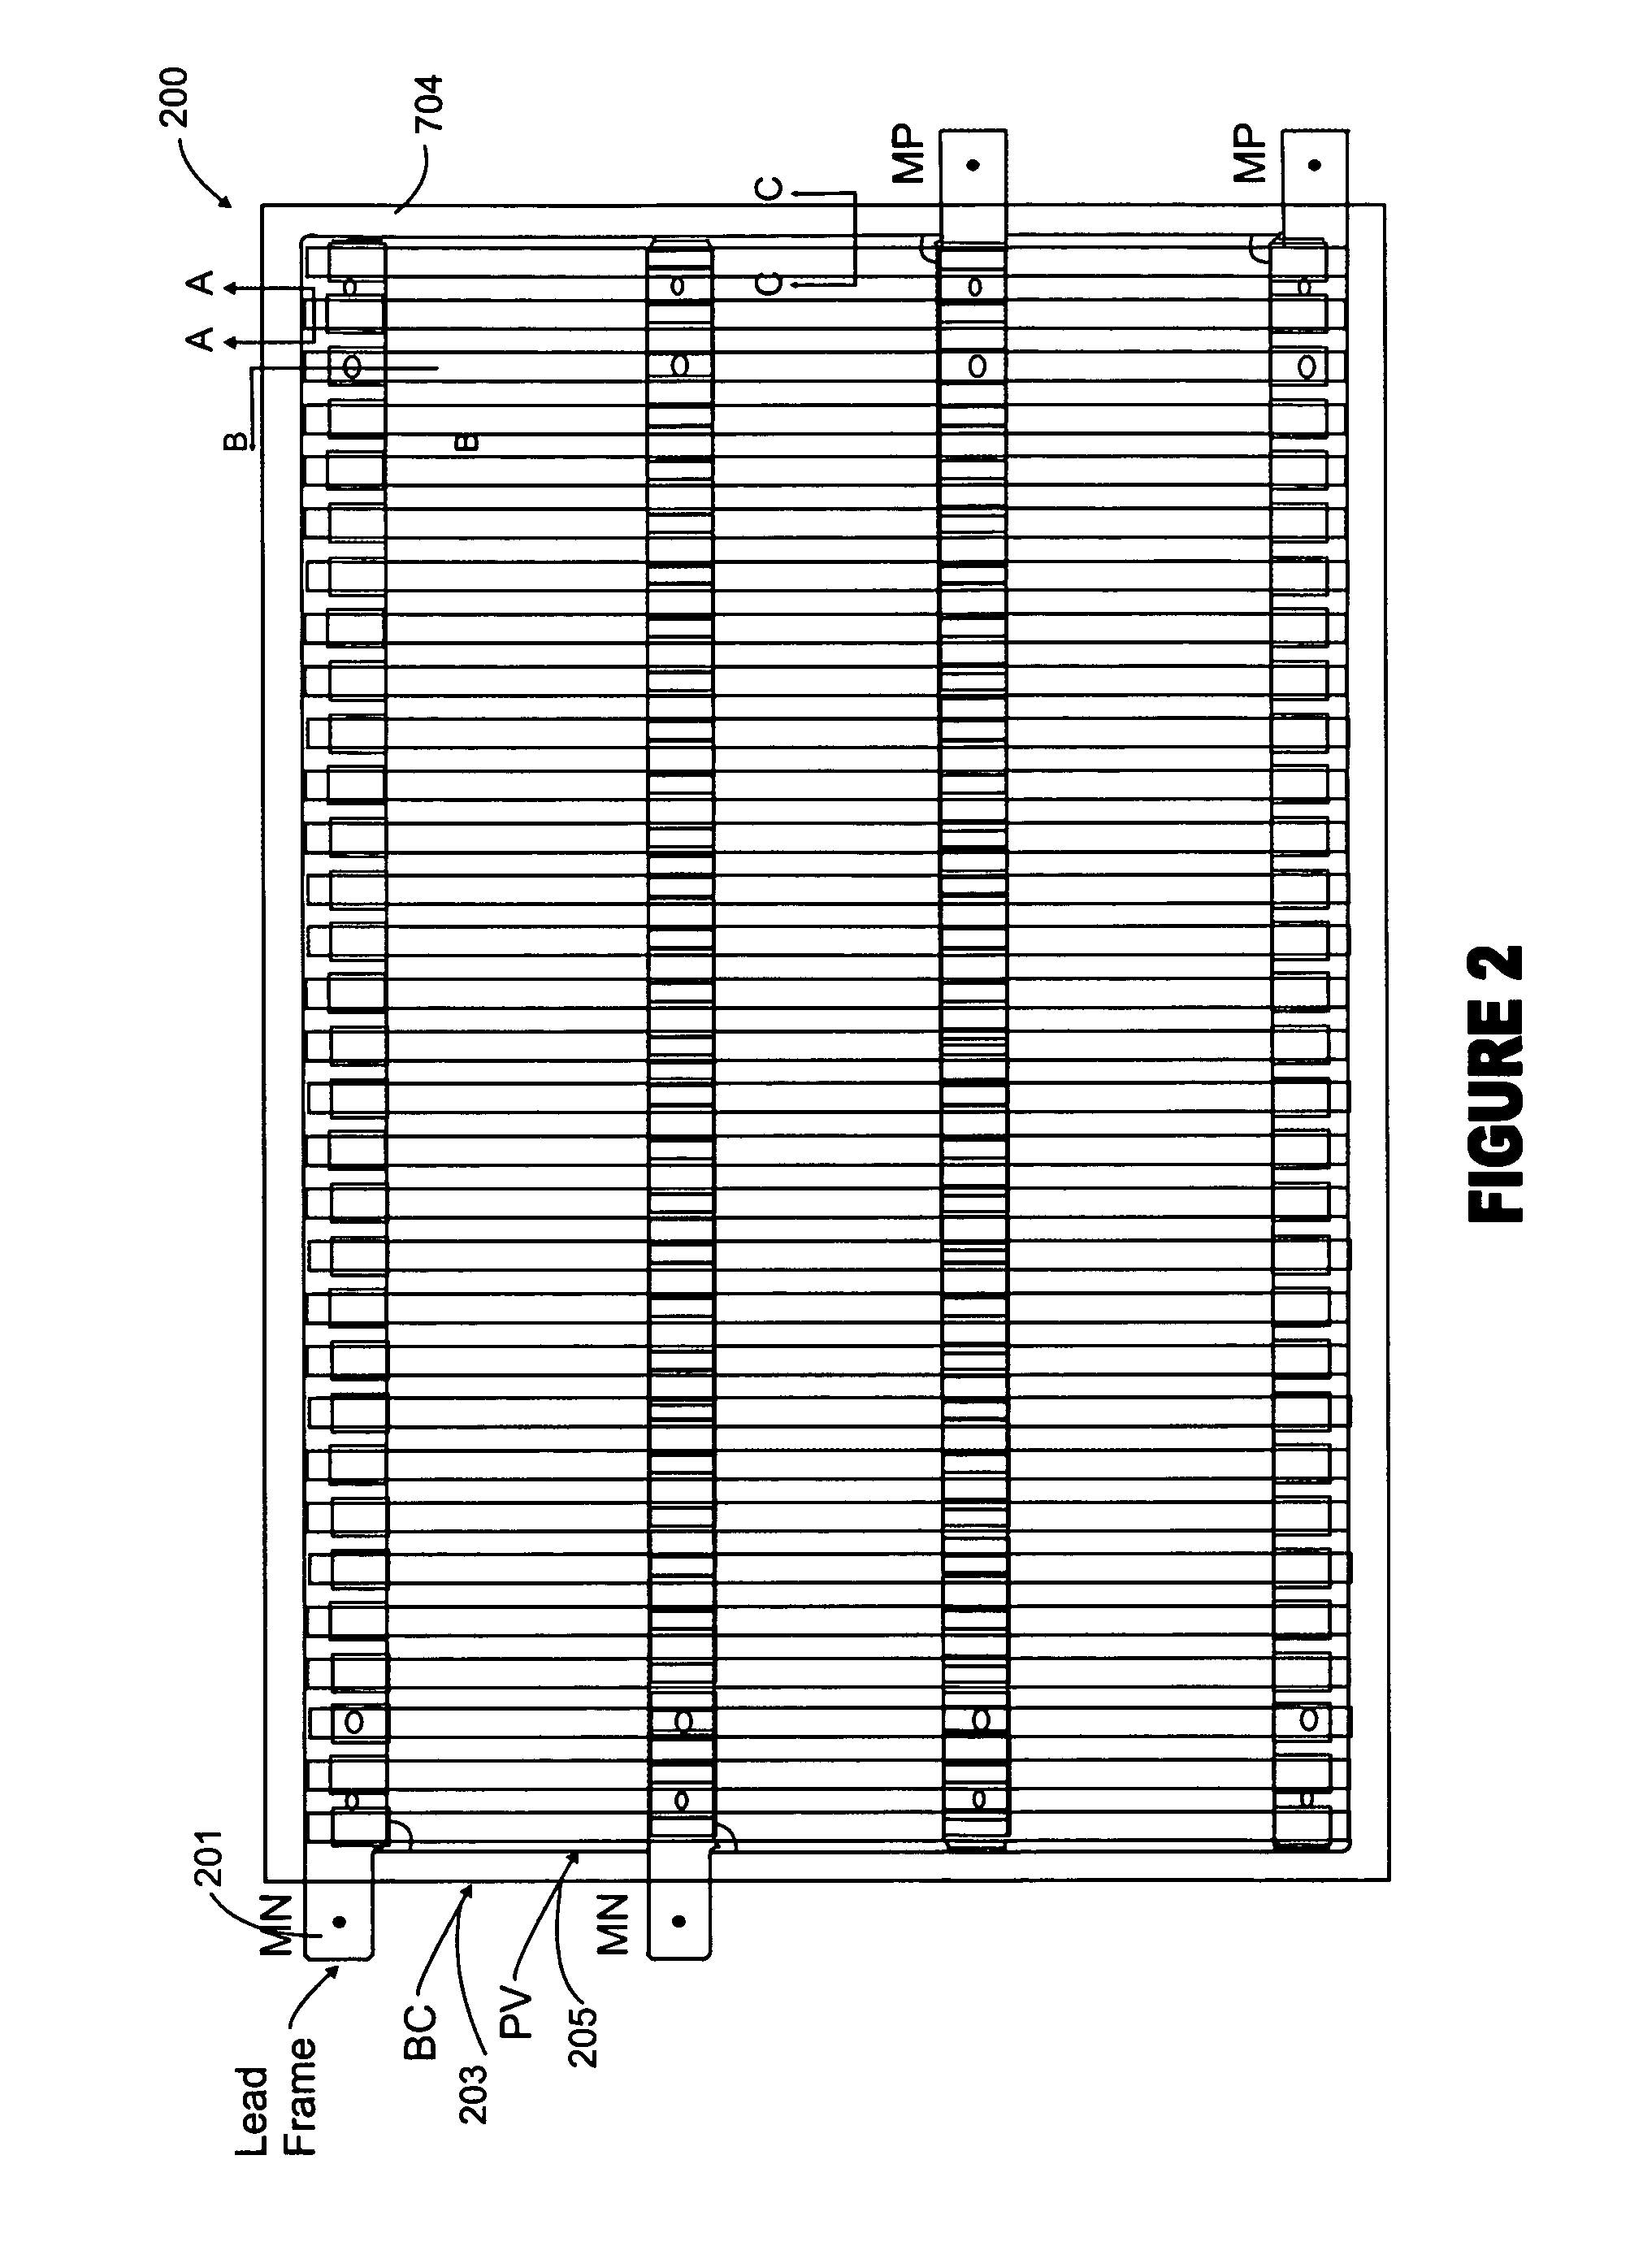 Fabrication process for photovoltaic cell